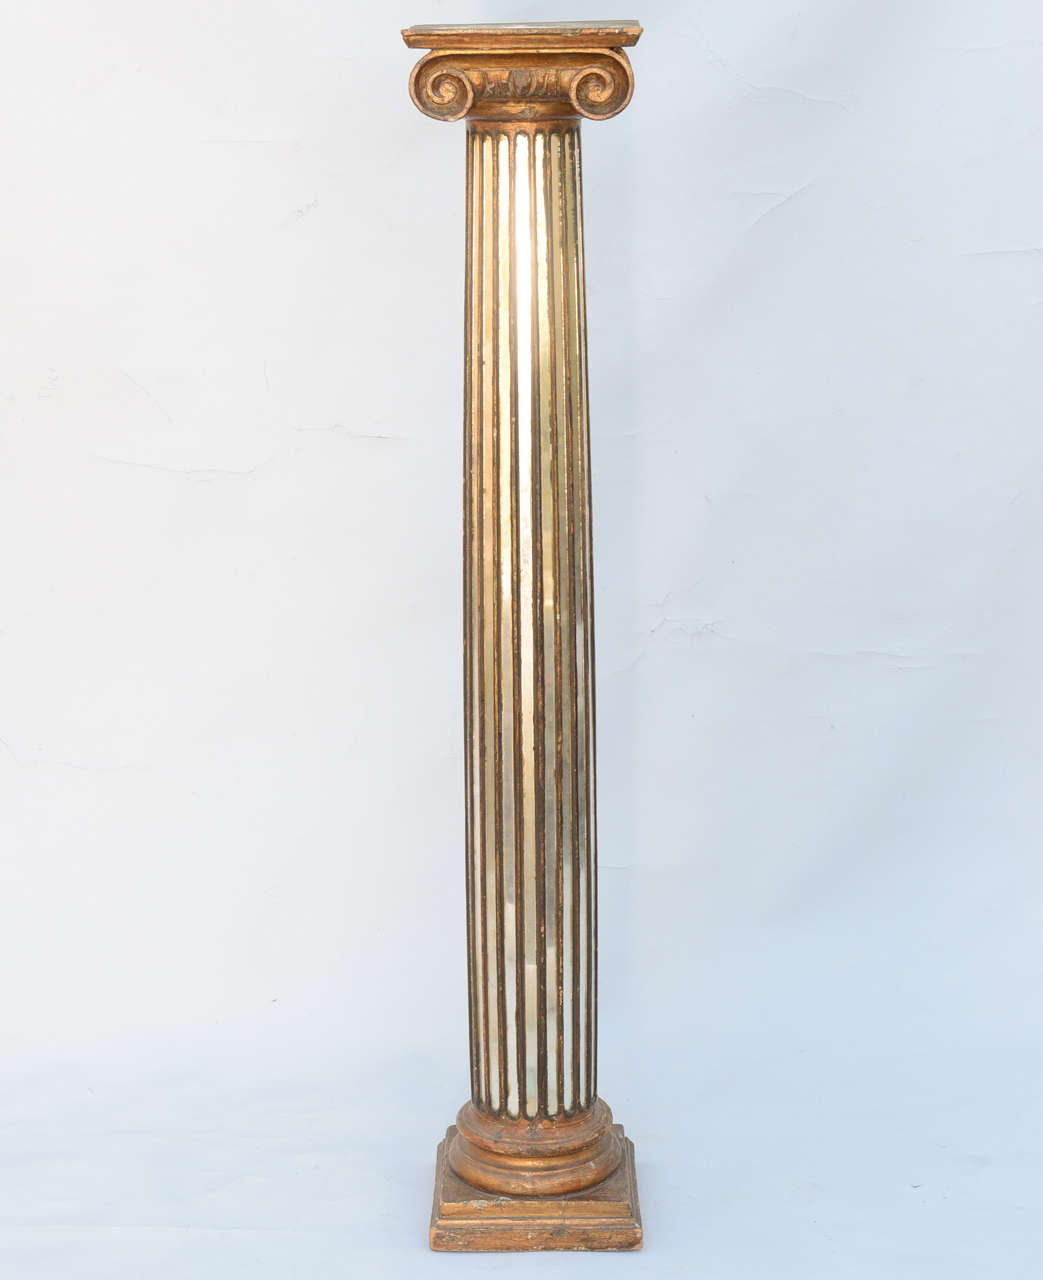 Pedestal, having fluted wood column with mirrored inserts, surmounted by carved wood Ionic capital and square platform.

Stock ID: D9220